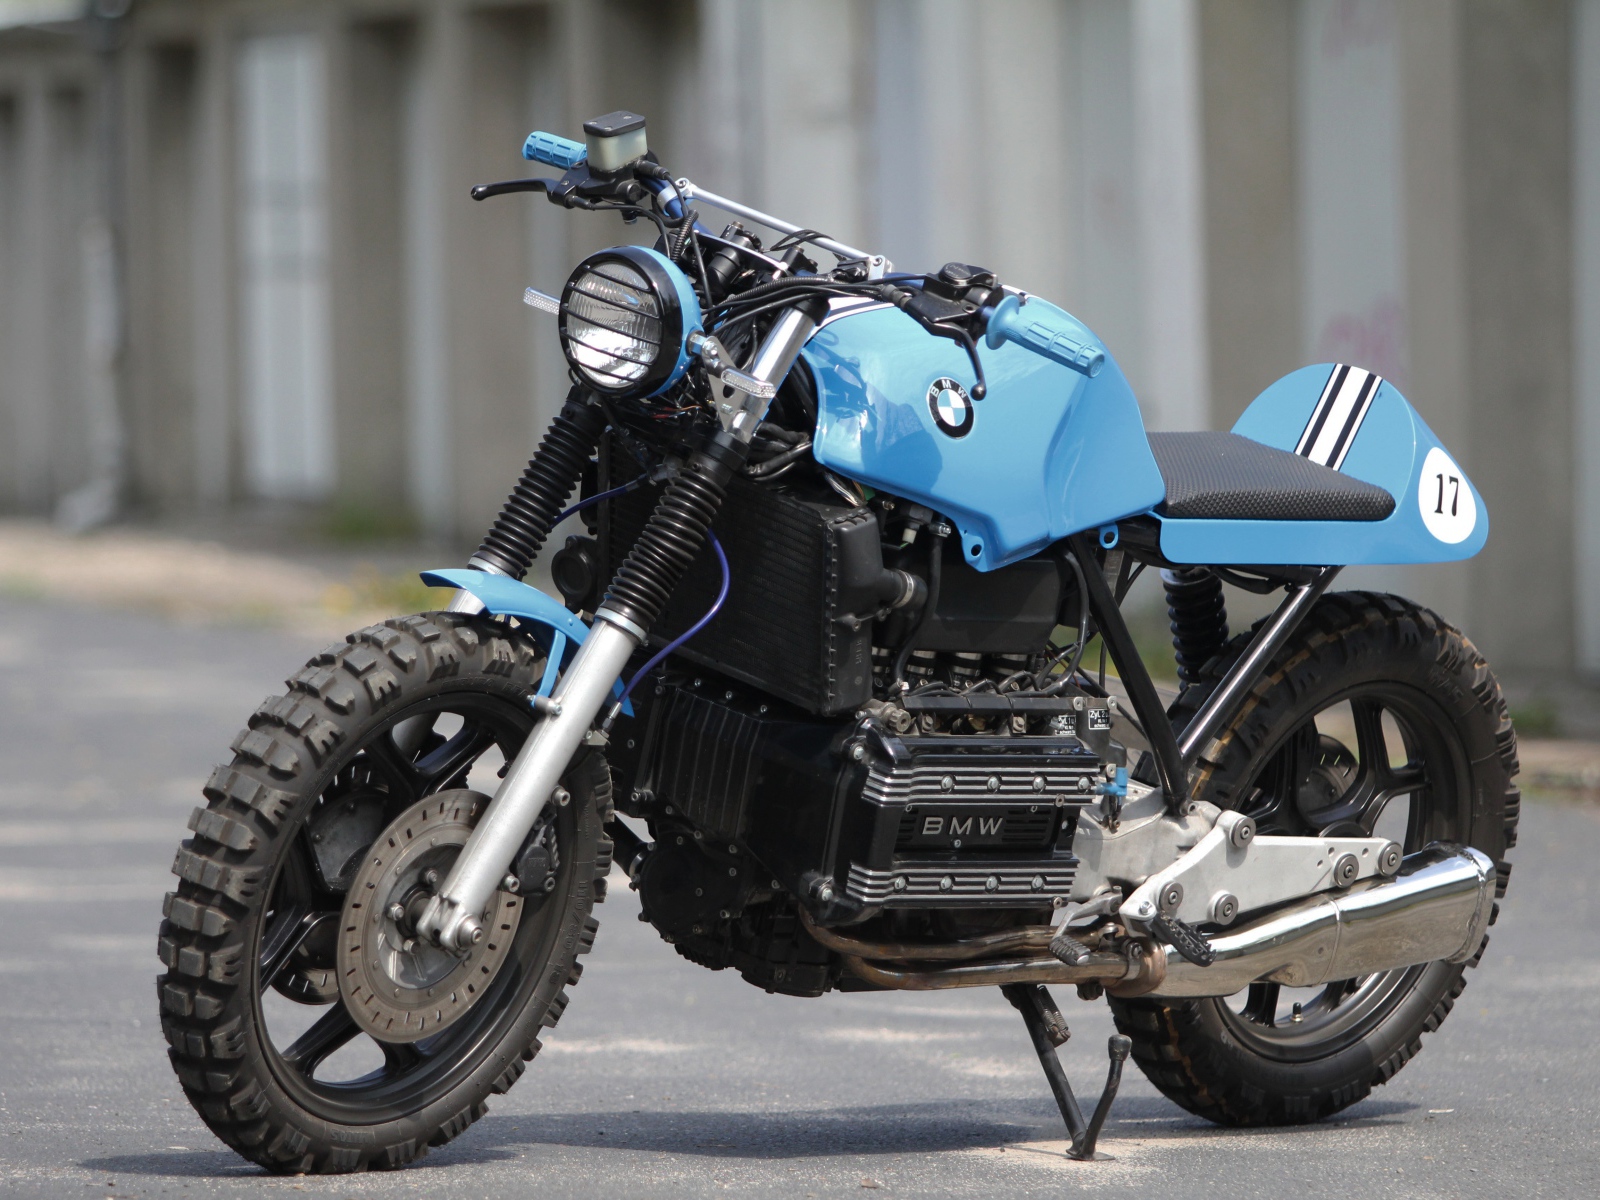 BMW K100 RS motorcycle on the pavement